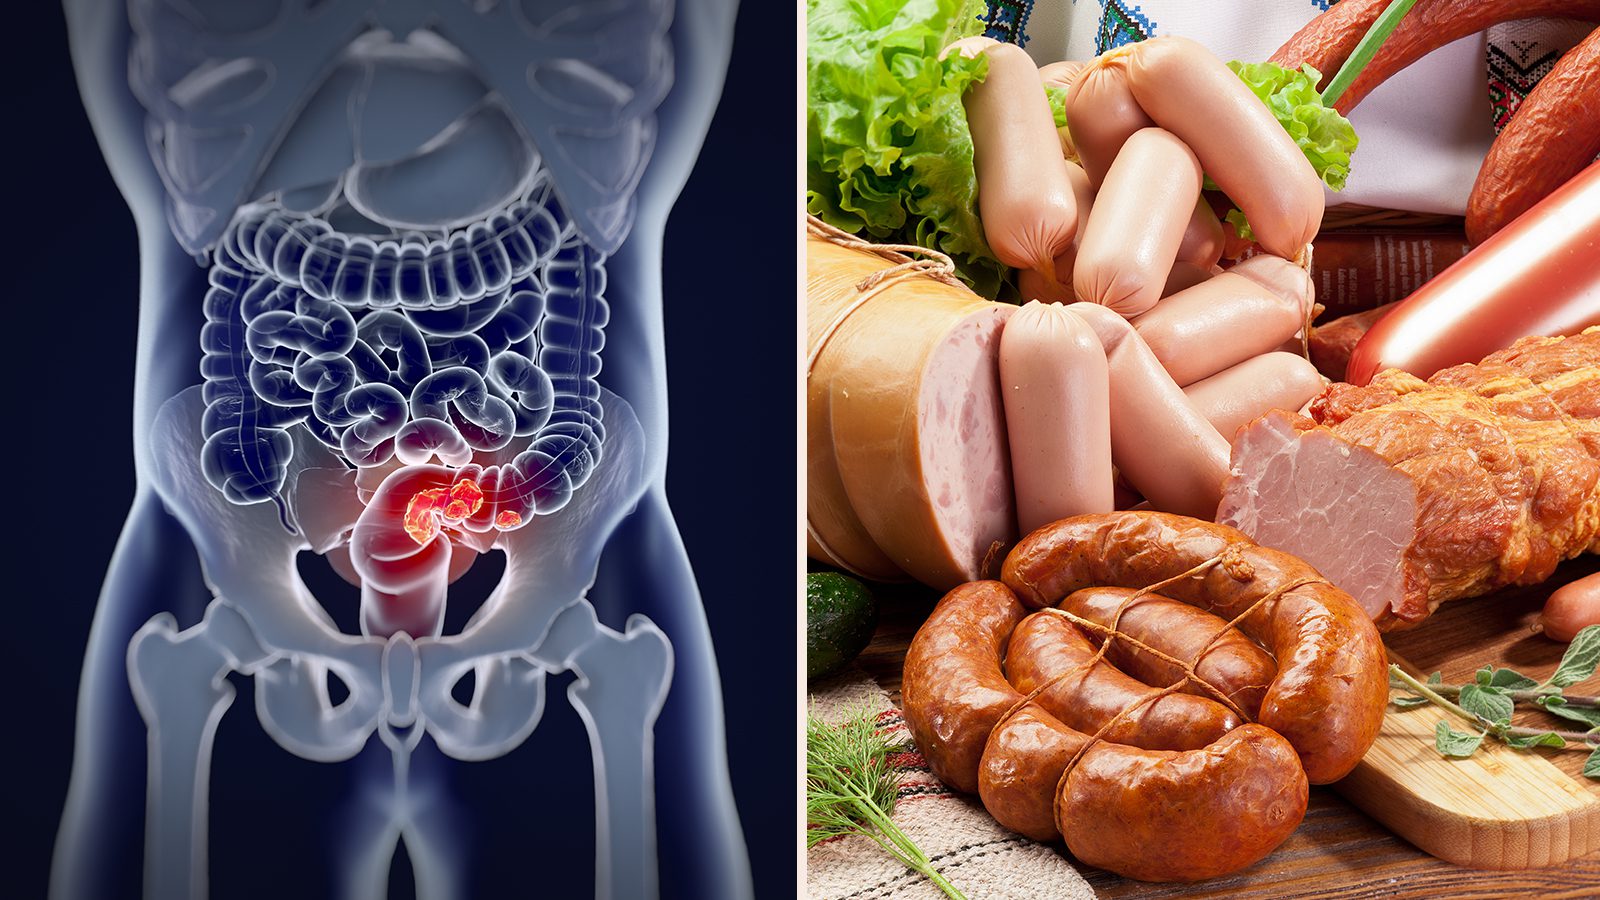 Researchers Reveal Ultra-processed Foods May Cause Colorectal Cancer